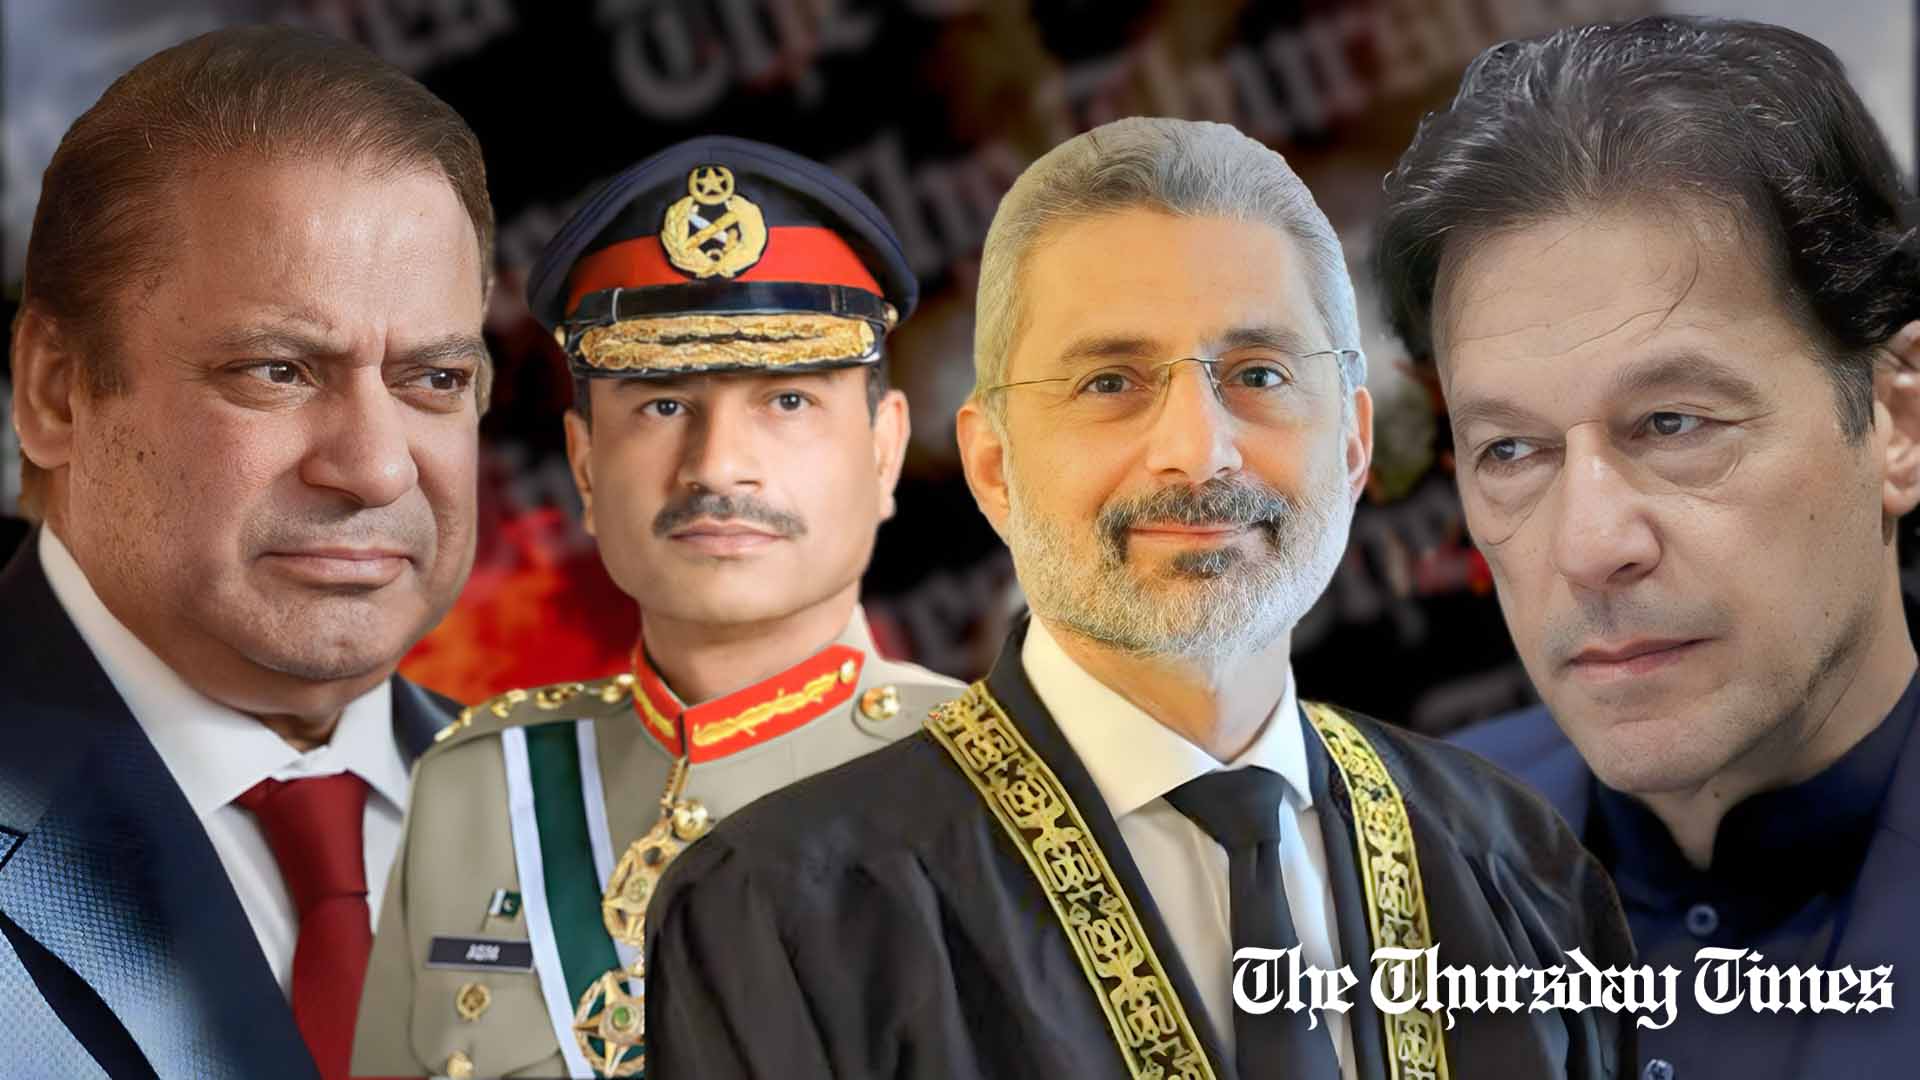 A combined file photo shows, from left to right, PML(N) supremo Nawaz Sharif, incumbent Chief of Army Staff General Asim Munir, incumbent Chief Justice of Pakistan Qazi Faez Isa, and incarcerated PTI founder Imran Khan. — FILE/THE THURSDAY TIMES